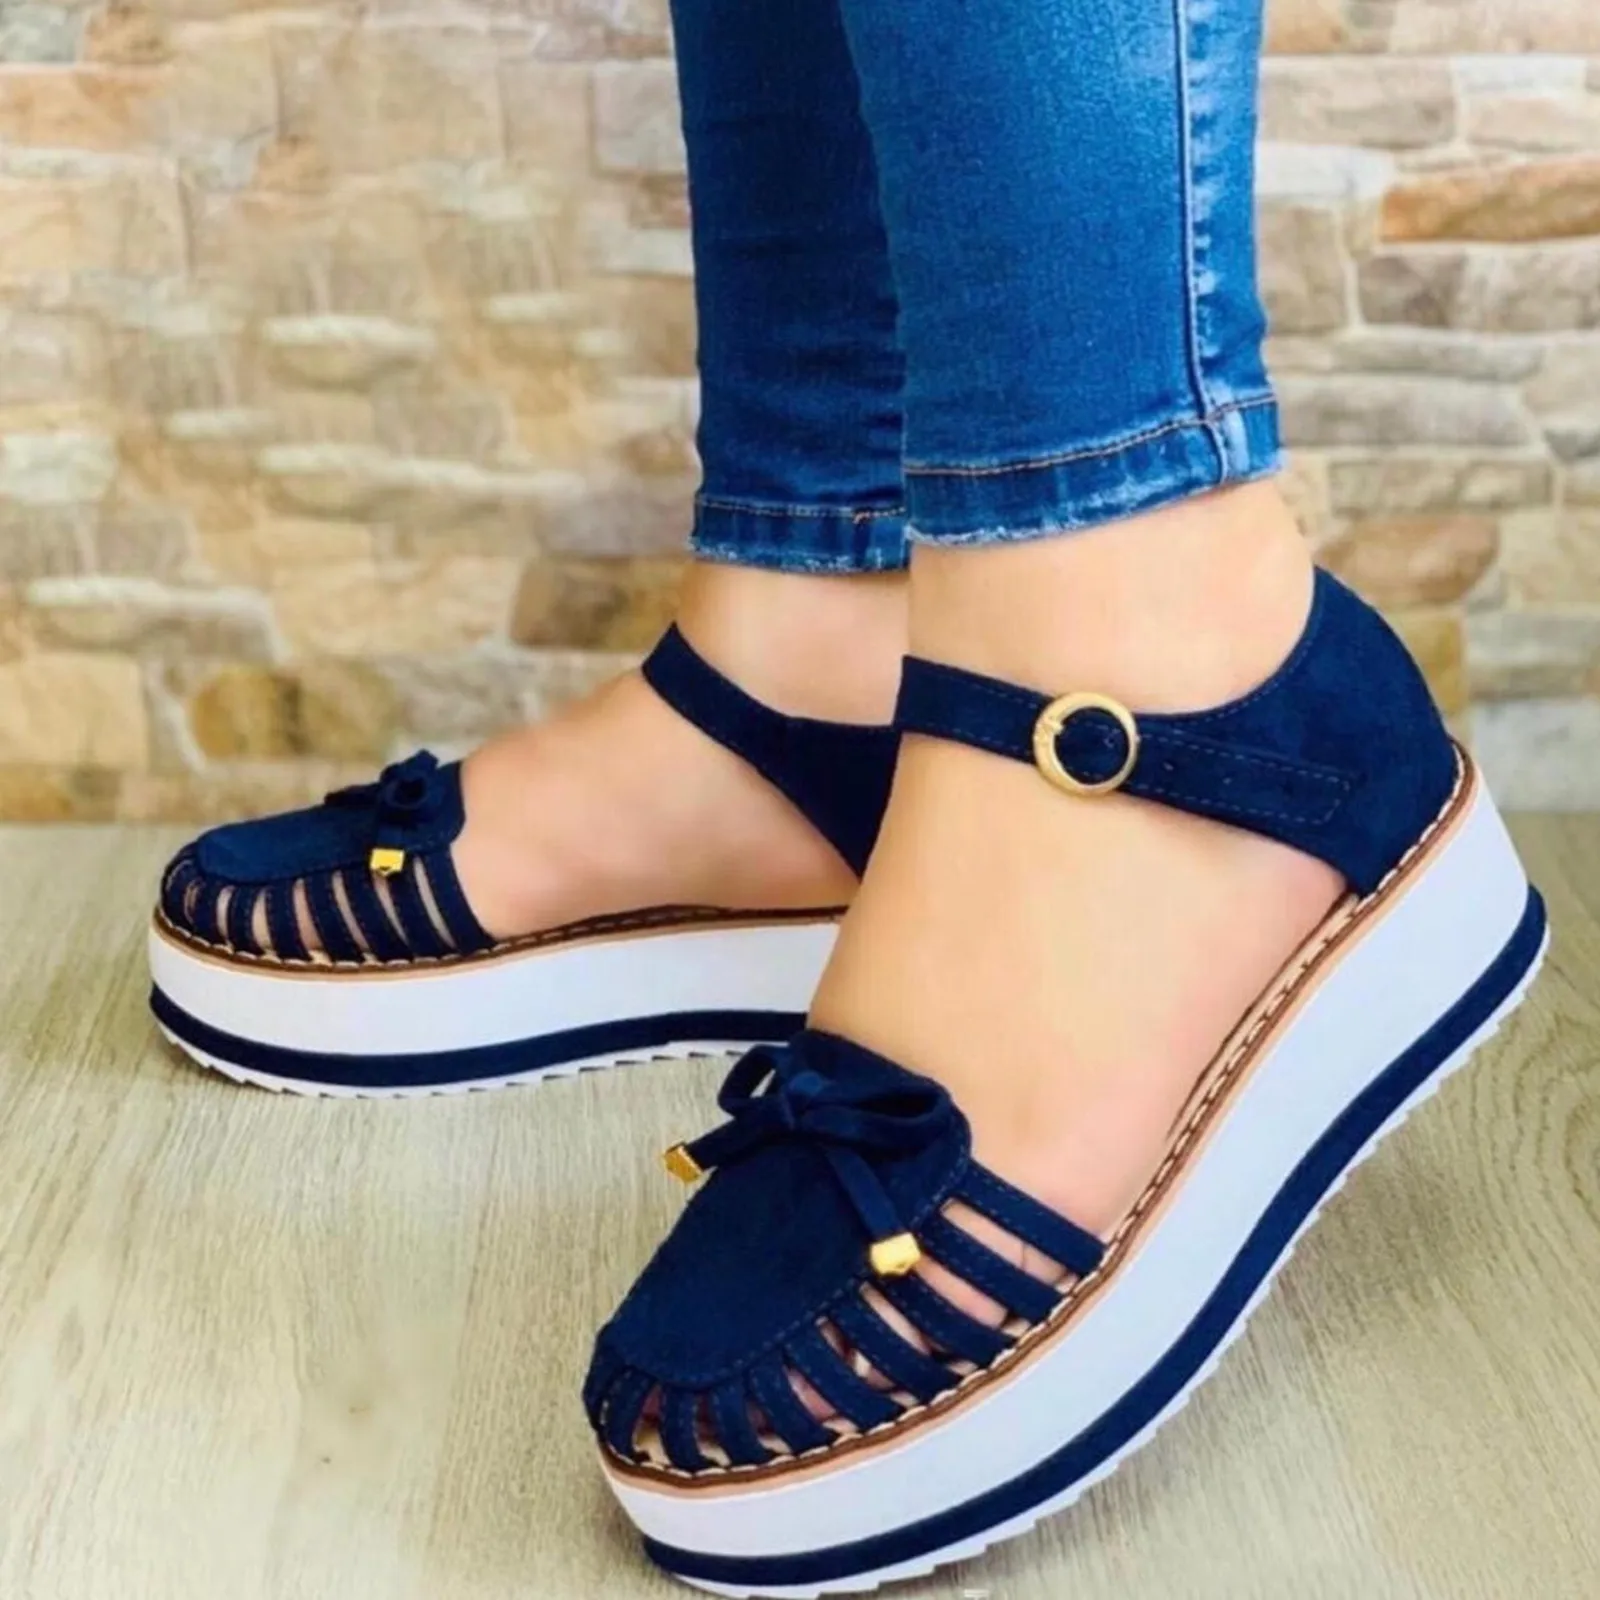 KAIXLIONLY Closed Toe Sandals Women Fashion Plus Size Casual Straw Shoes Baotou Buckle Strap Comfortable Soft Wedge Shoes 